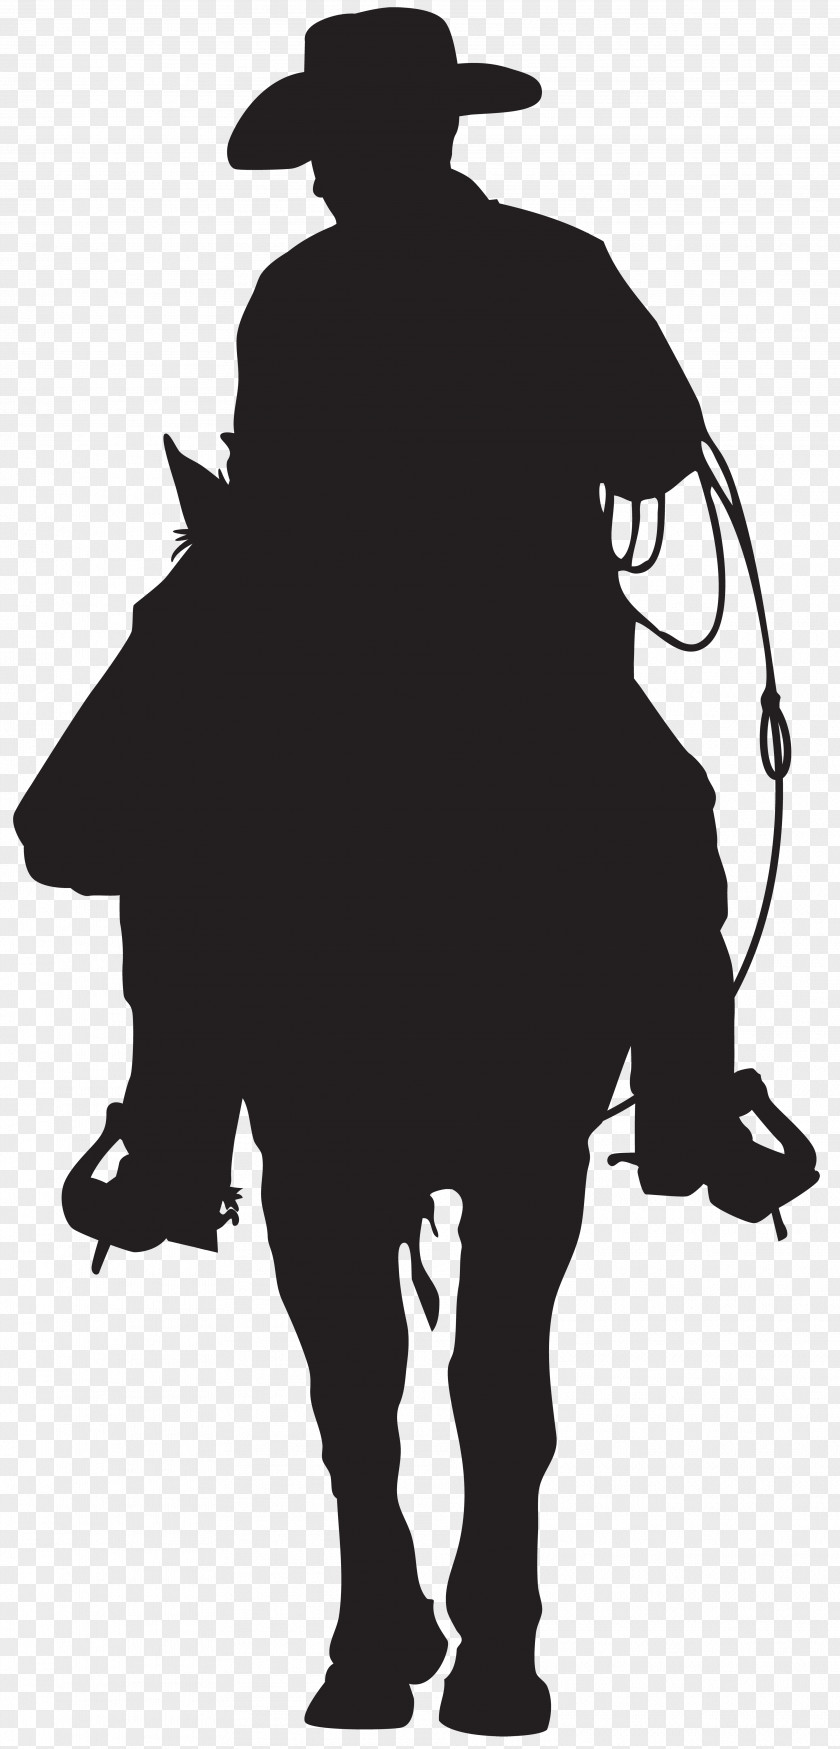 Cowboy Silhouette Clip Art Image American Frontier PNG